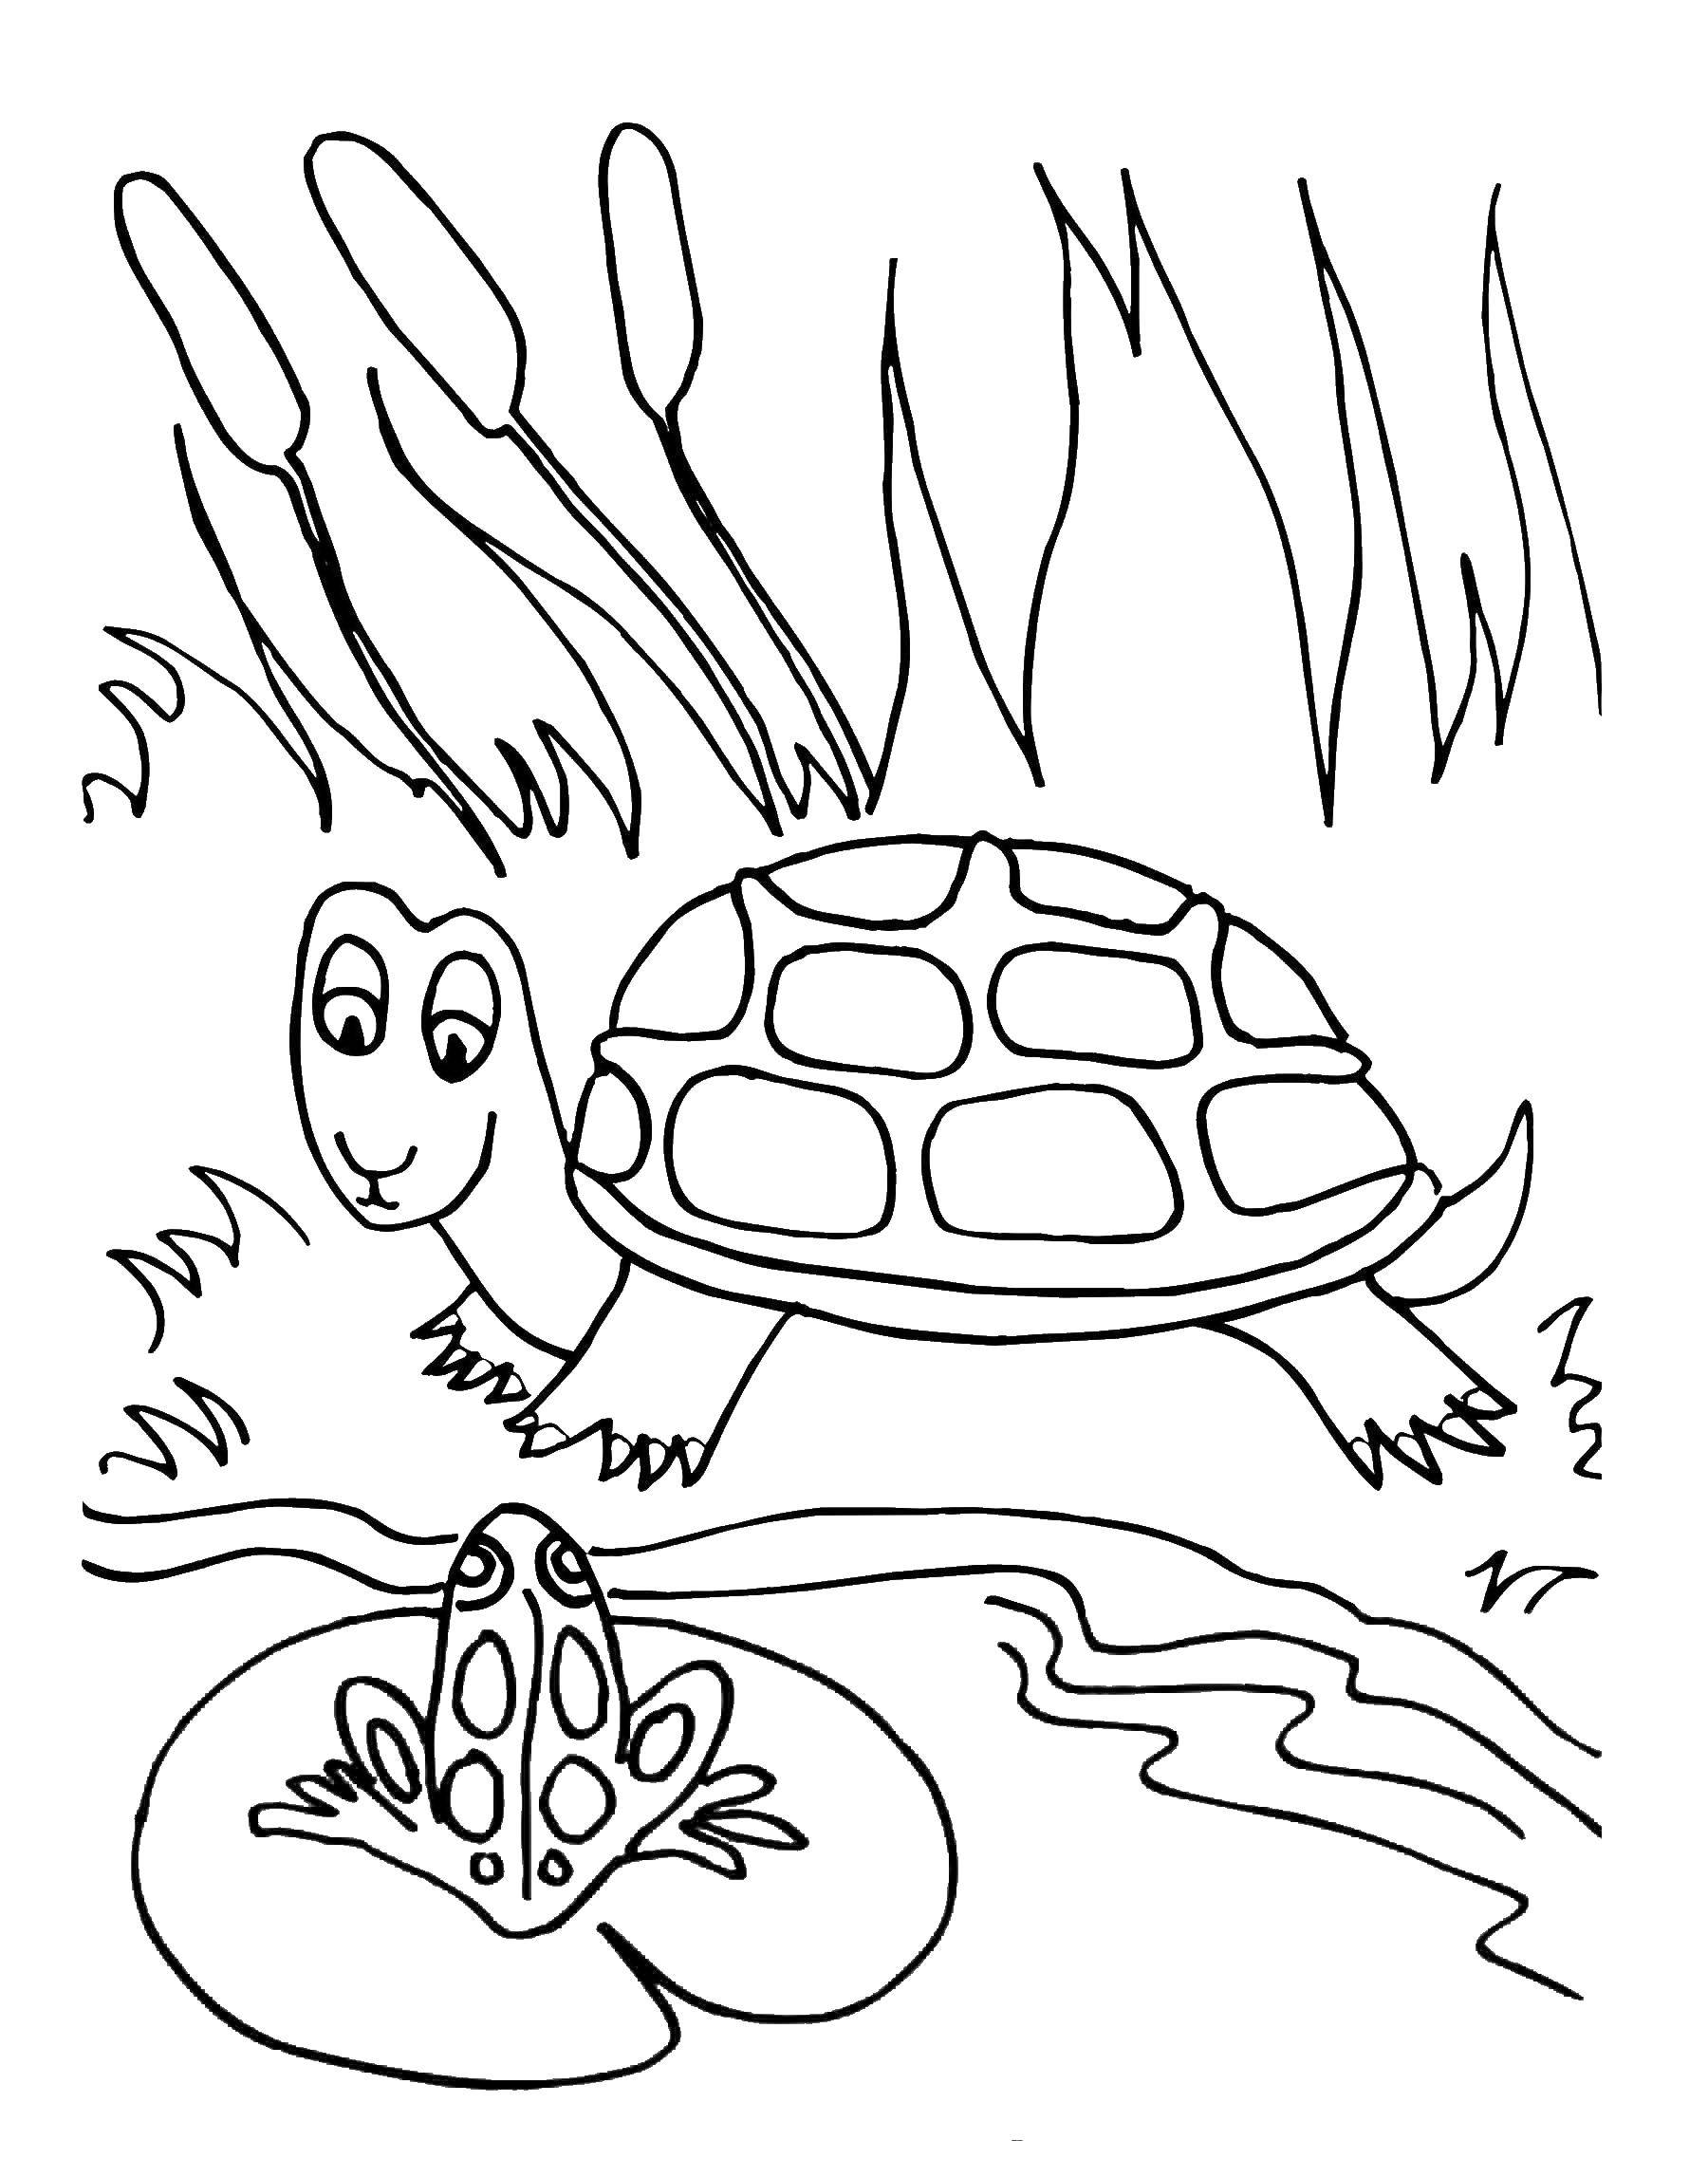 Coloring The turtle and the frog. Category Animals. Tags:  animals, turtle, tortoise, frog.